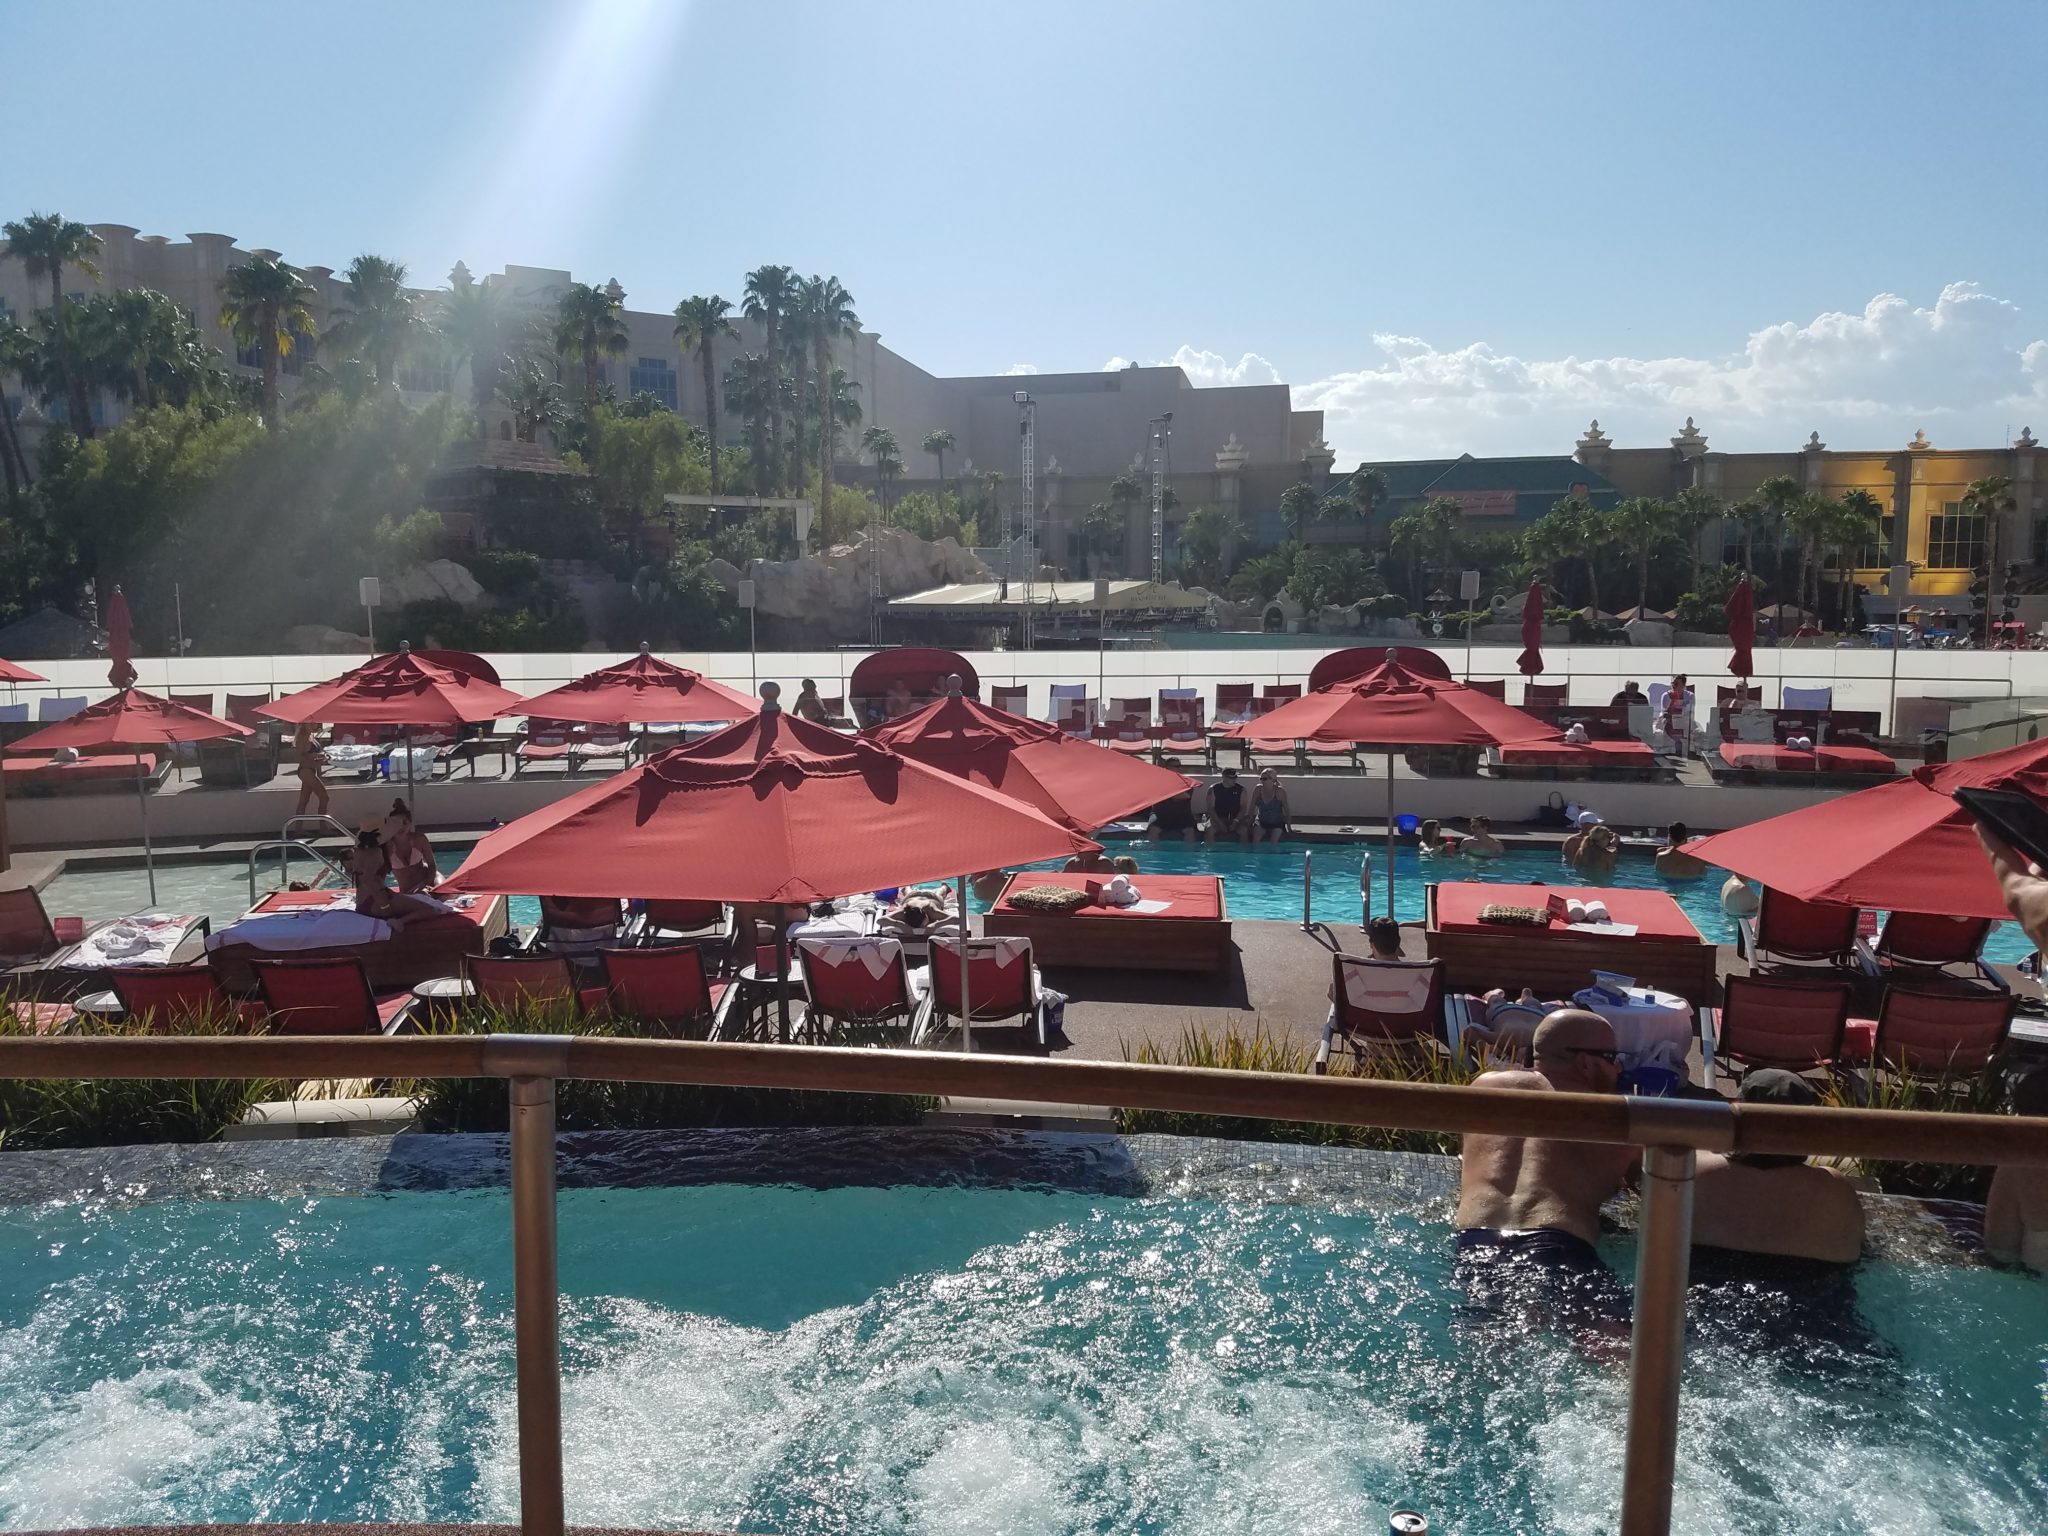 a pool with red umbrellas and people in it